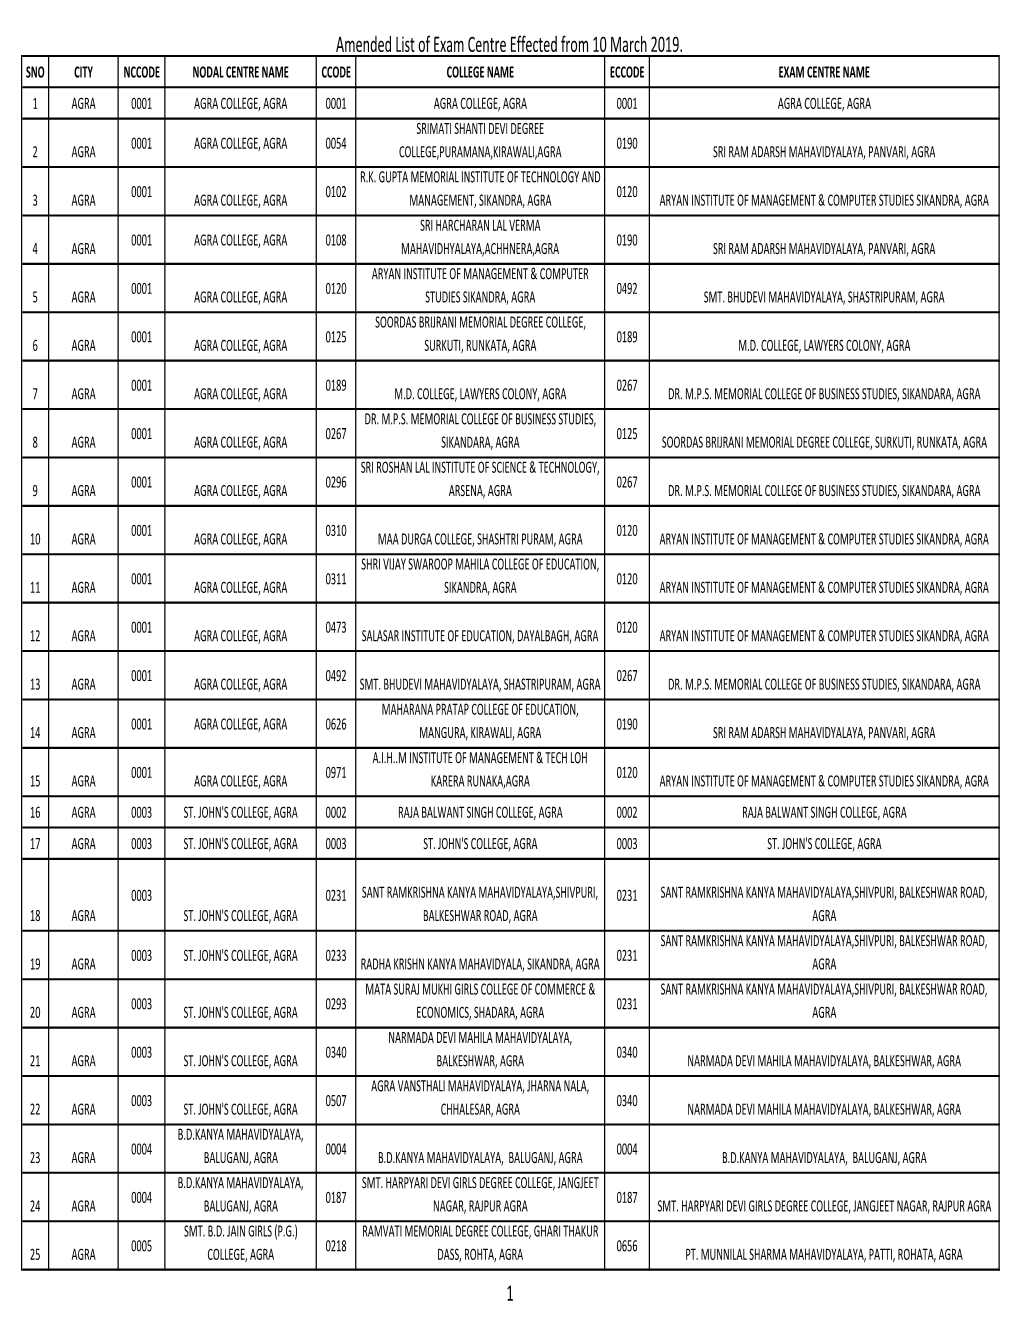 Amended List of Exam Centre Effected from 10 March 2019